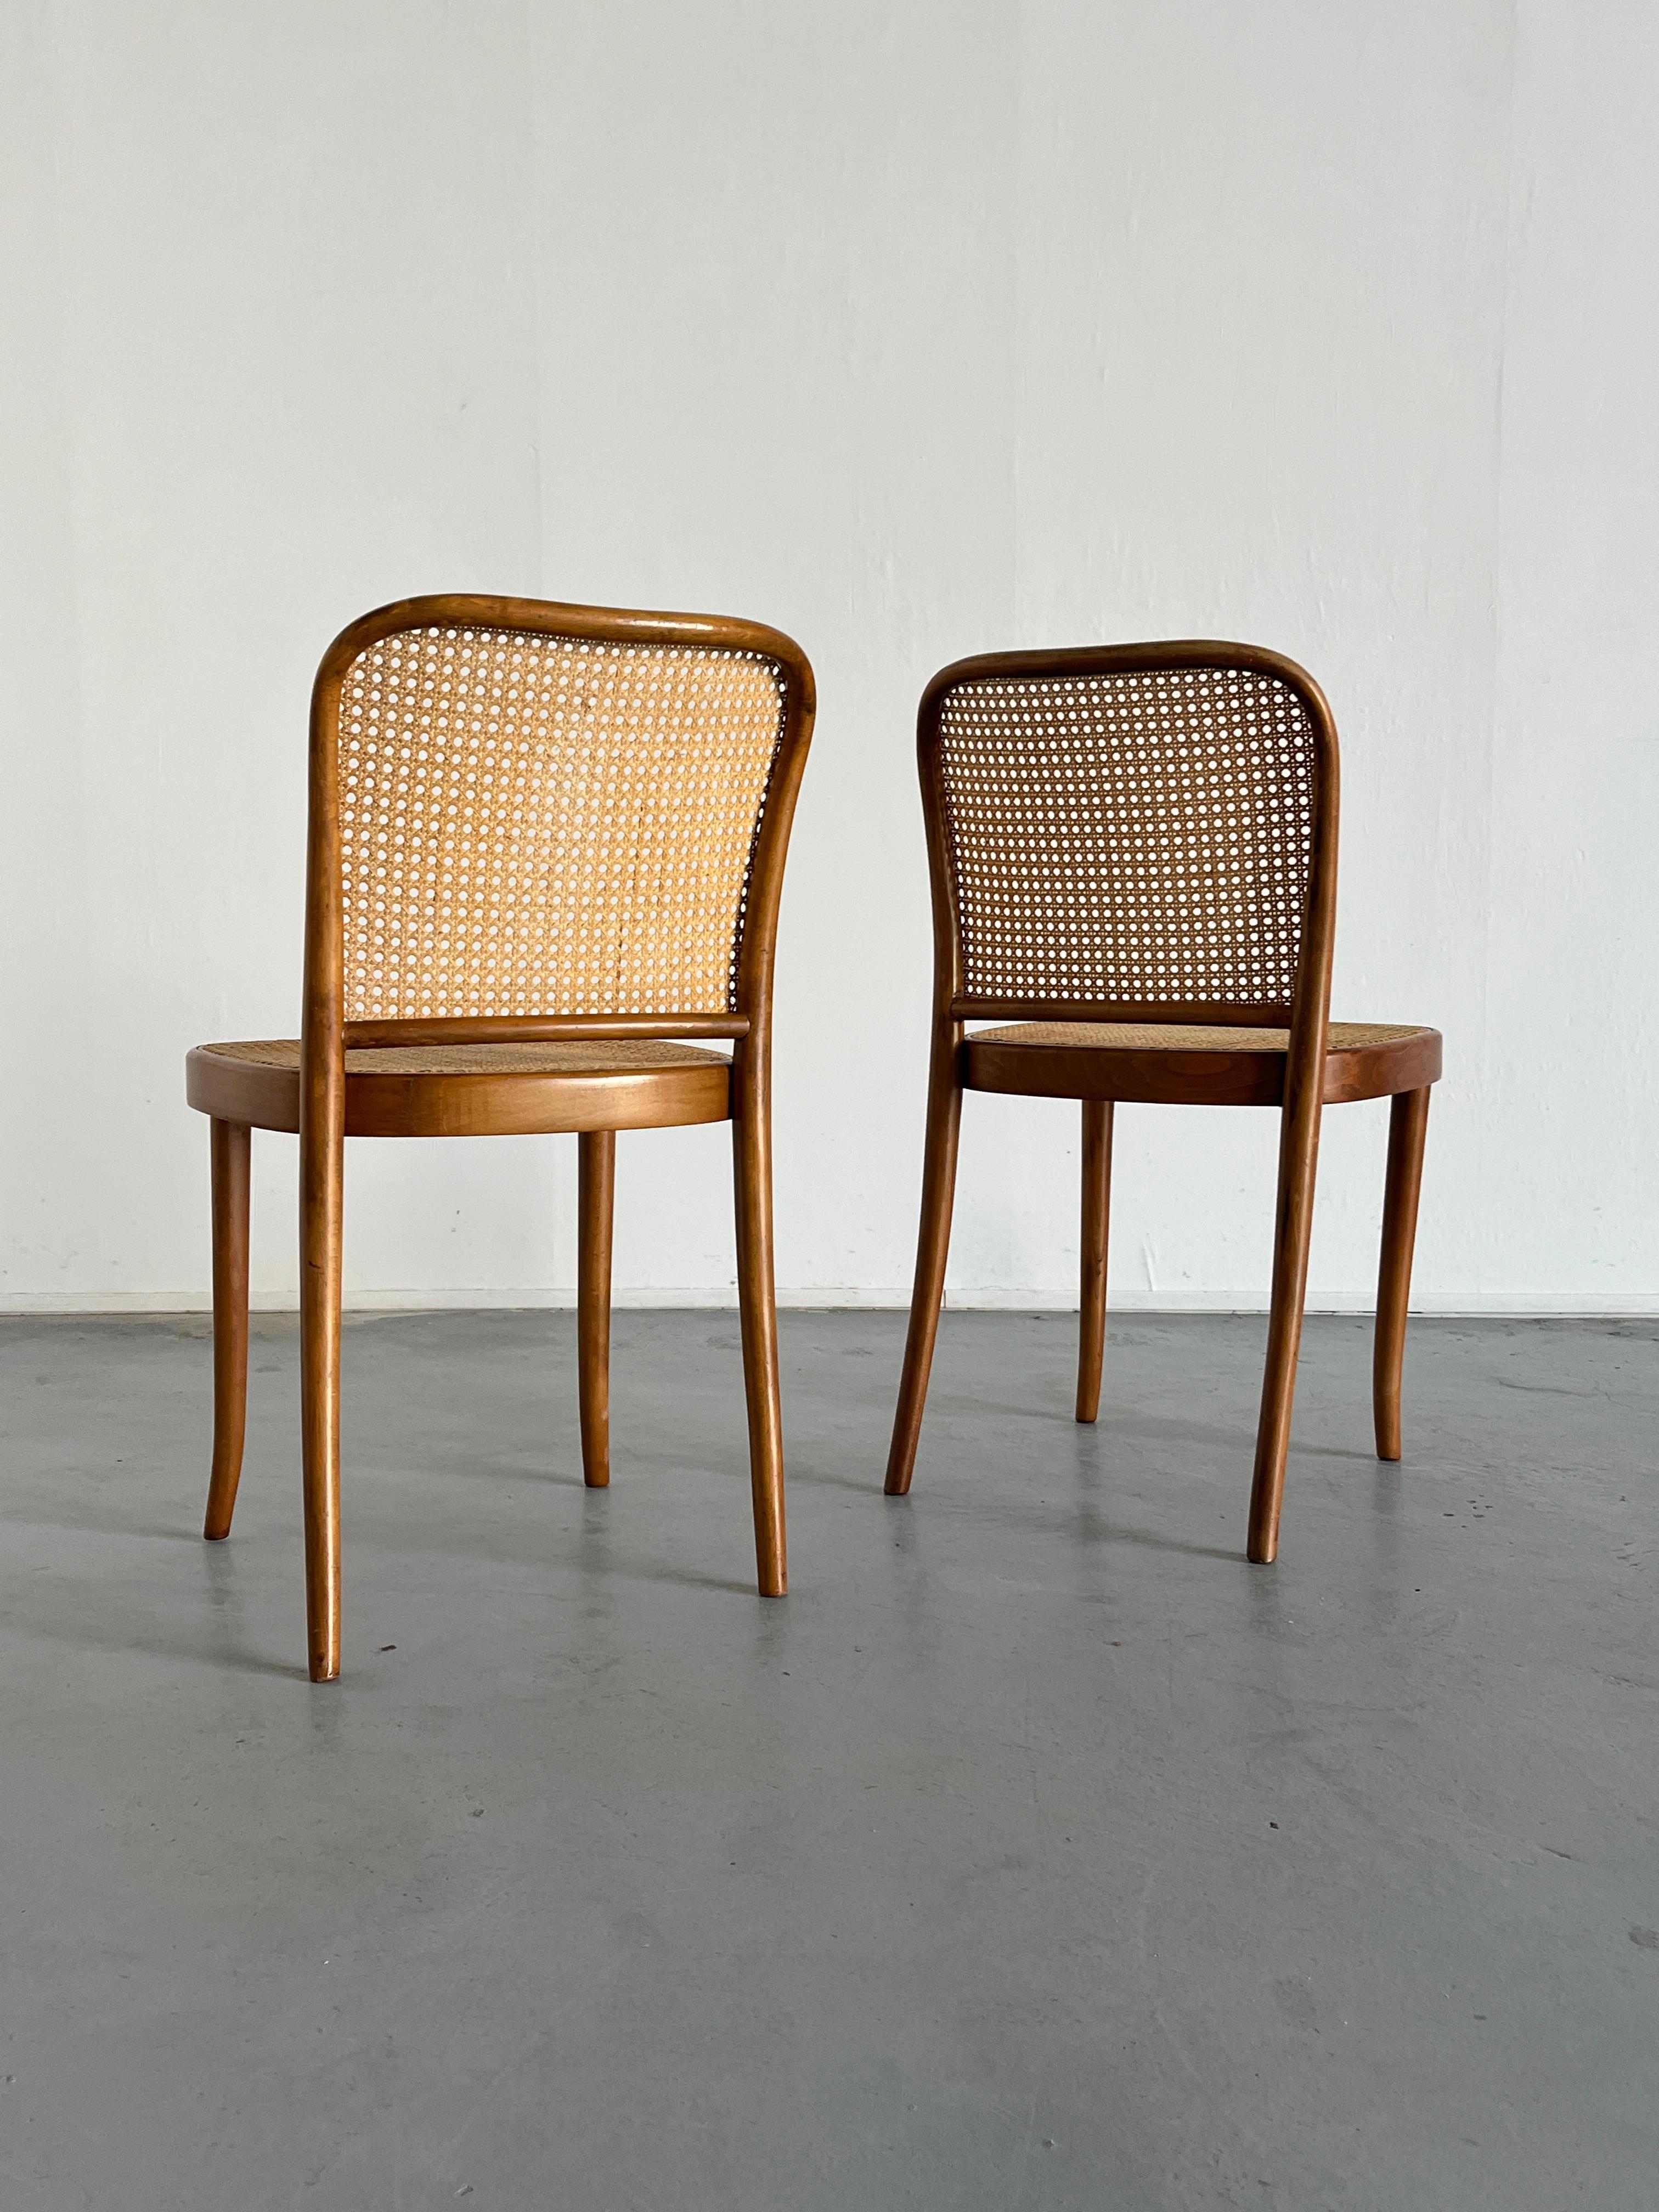 Late 20th Century Set of 4 Vintage Thonet Bentwood No.811 Chairs, Designed by Josef Hoffman, 1970s